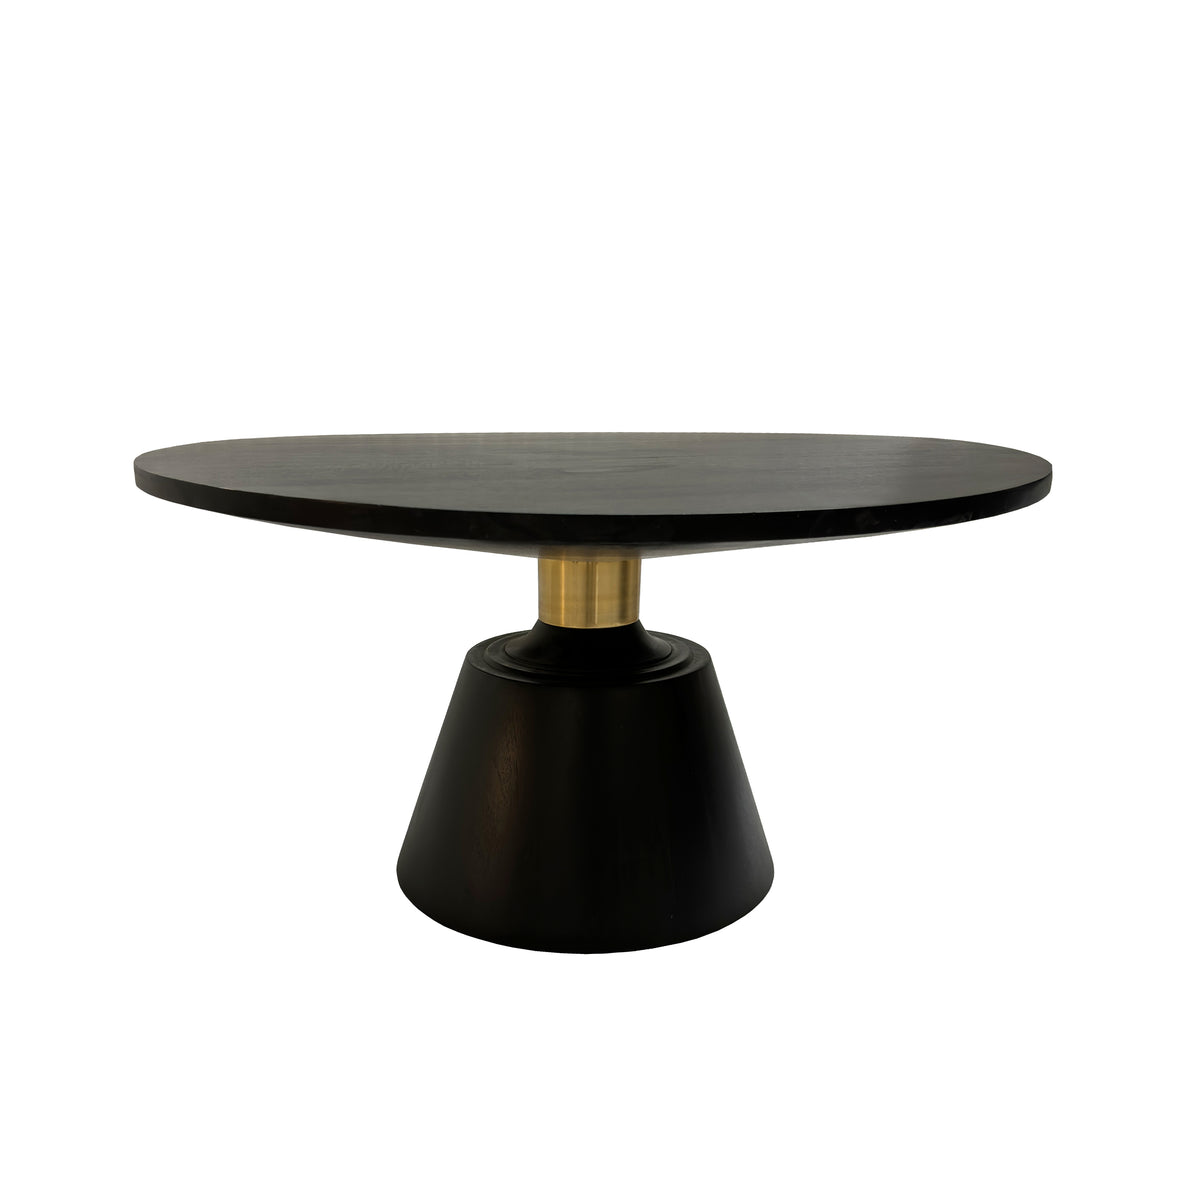 Fawn 32 Inch Coffee Table, Black Mango Wood Round Top, Modern Tapered Pedestal Base, Shiny Brass Support - UPT-295601